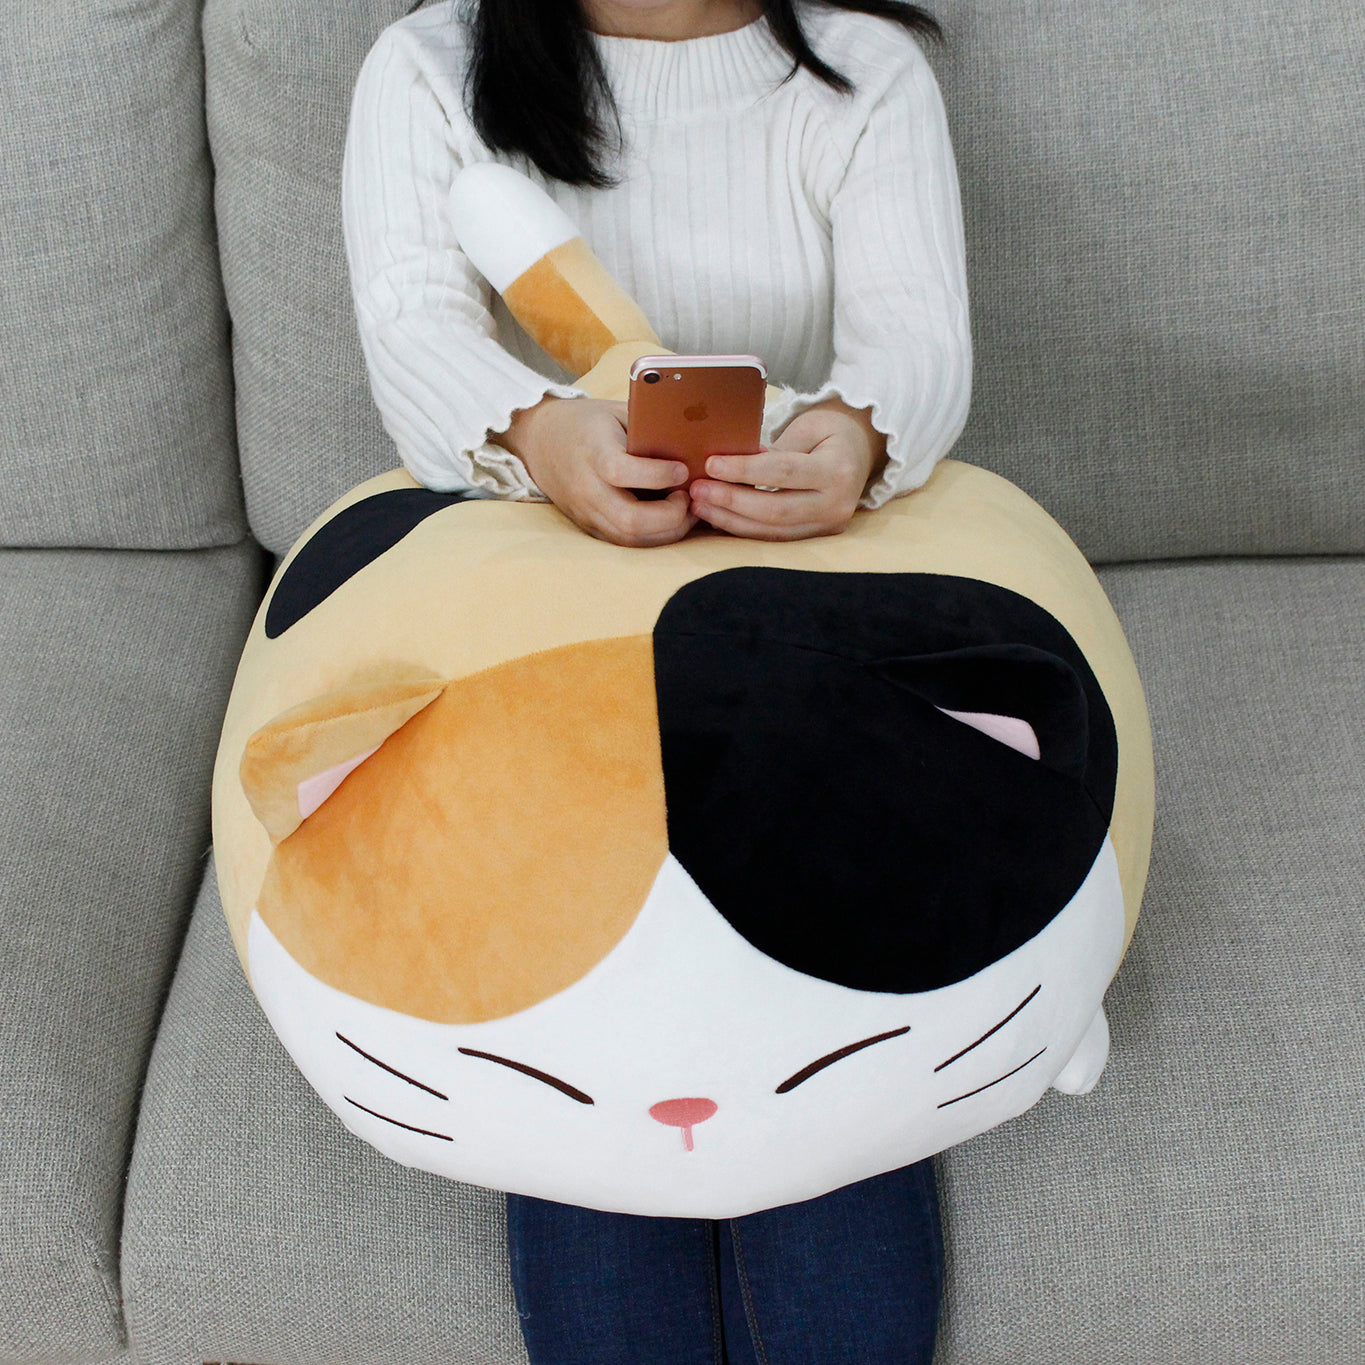 Front view of model sitting on grey couch using phone with Camang pillow on their lap, its tail sticking up.